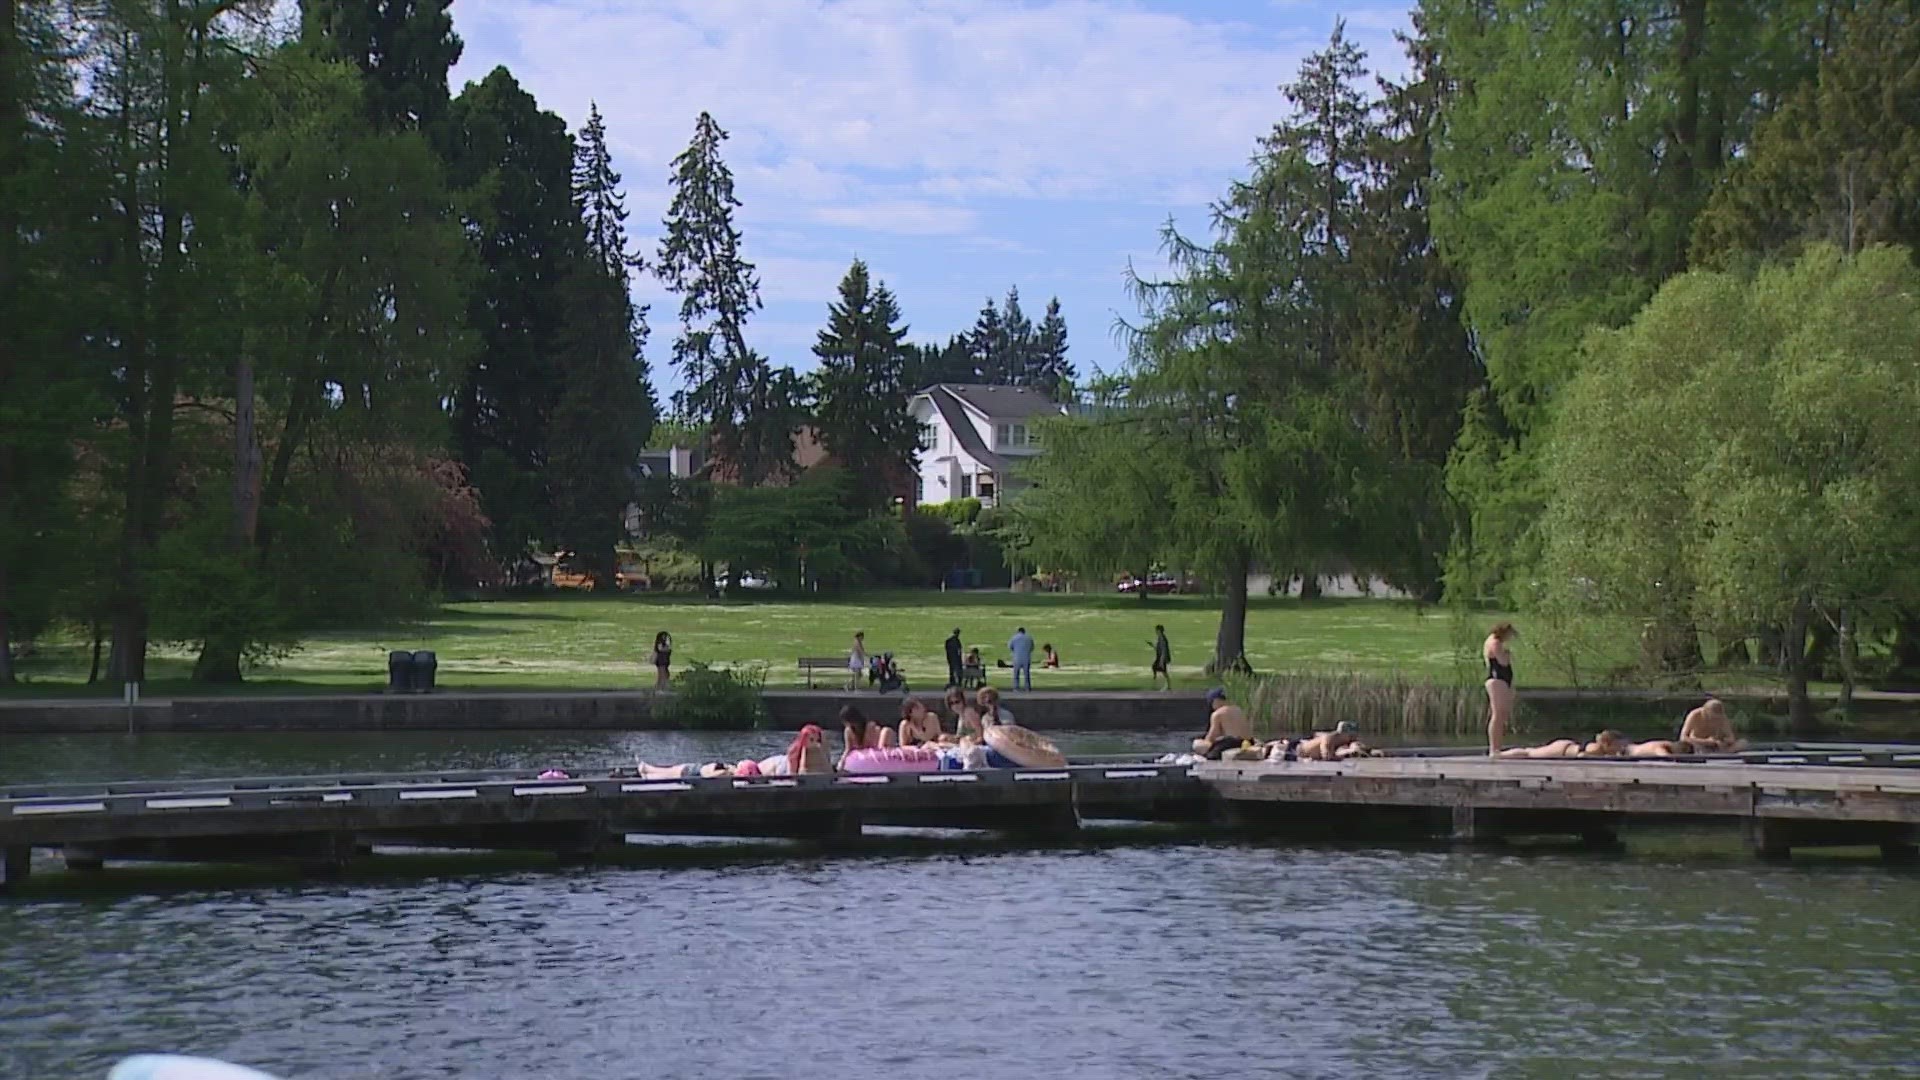 The body of an 18-year-old man was recovered from Lake Sammamish after he drowned over the weekend.